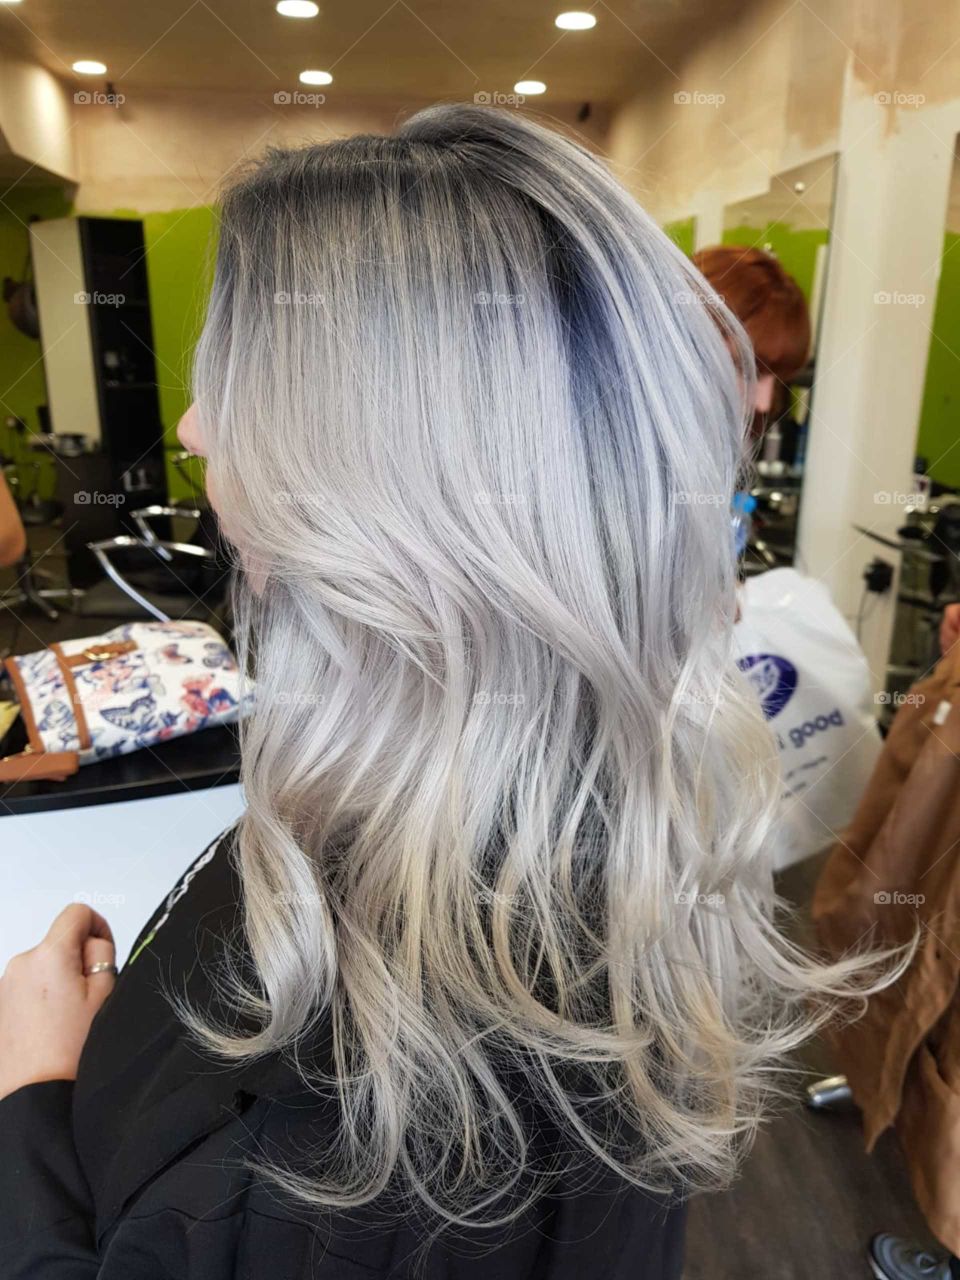 Smokey gray ombré hair using opalex and Wella toners